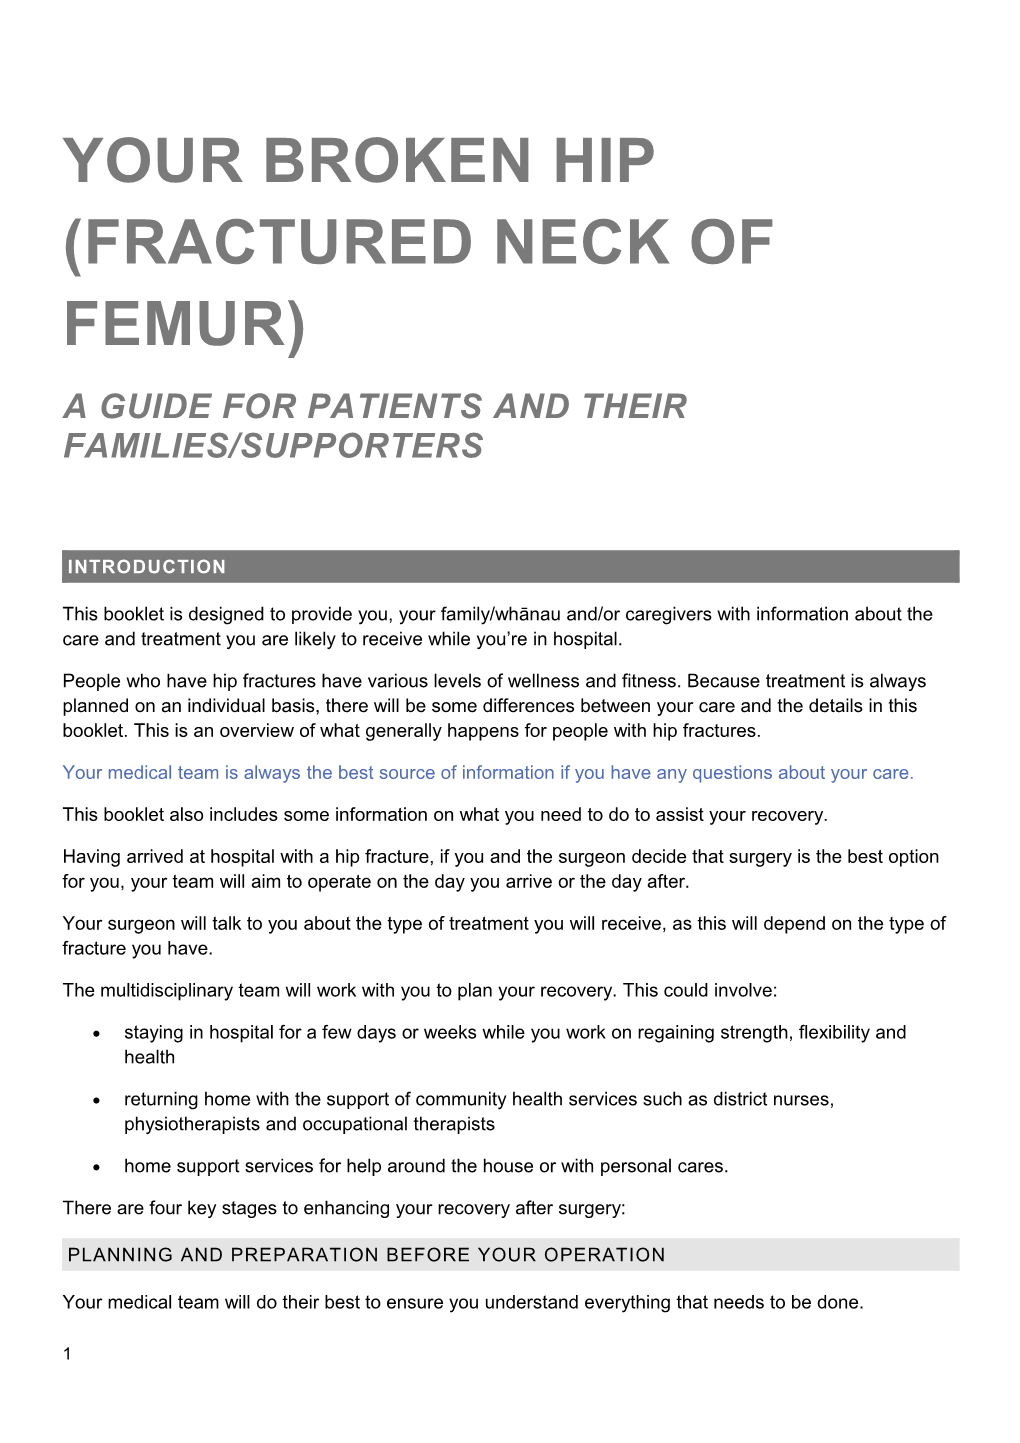 Your Broken Hip (Fractured Neck of Femur): a Guide for Patients and Their Families/Supporters